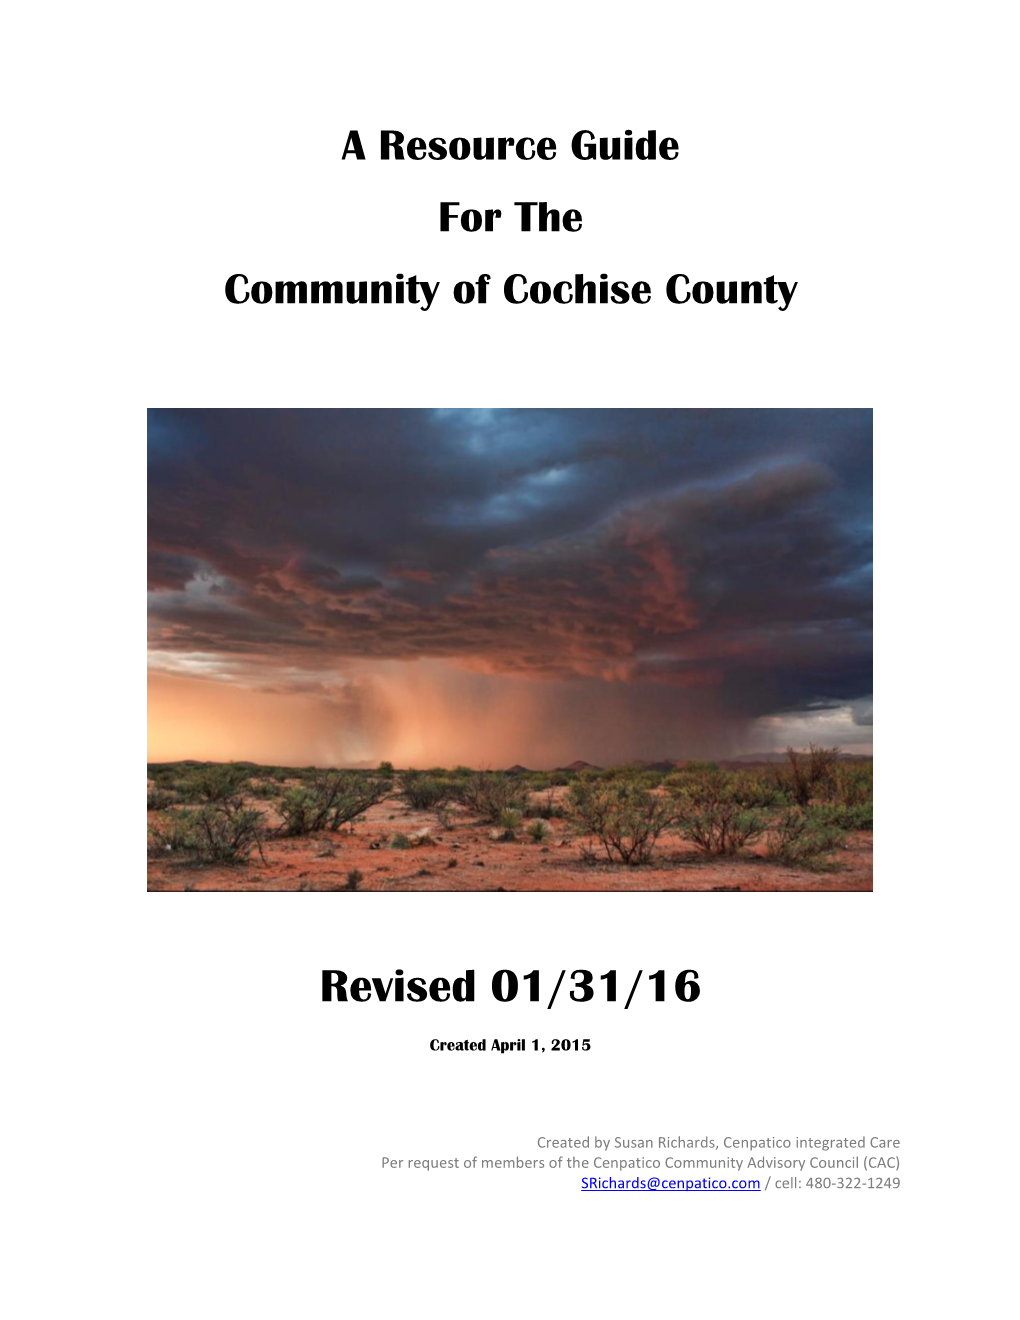 A Resource Guide for the Community of Cochise County